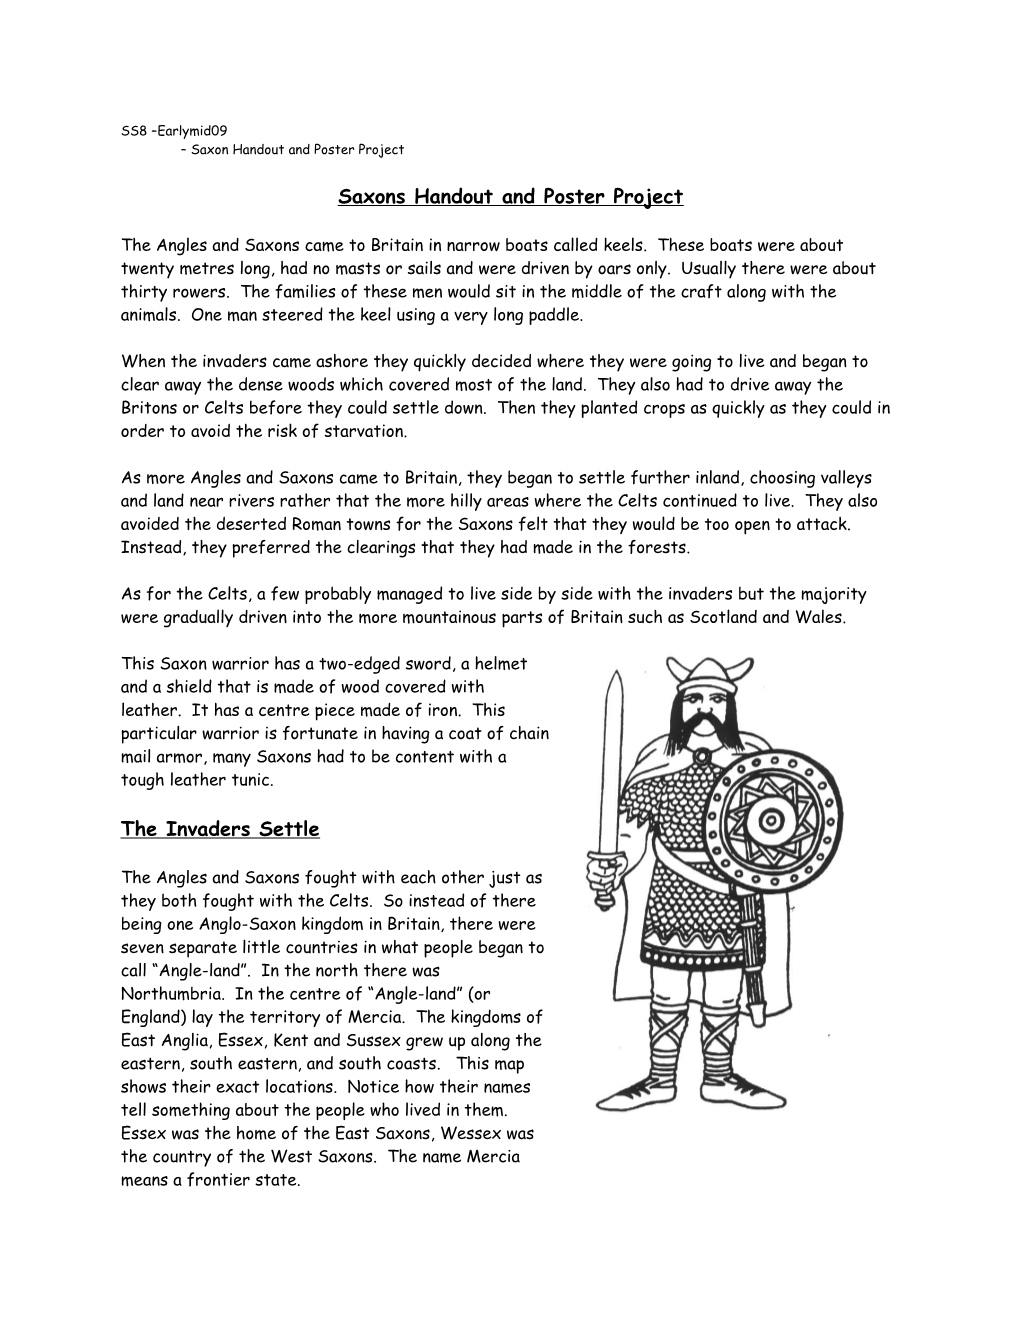 Saxons Handout and Poster Project